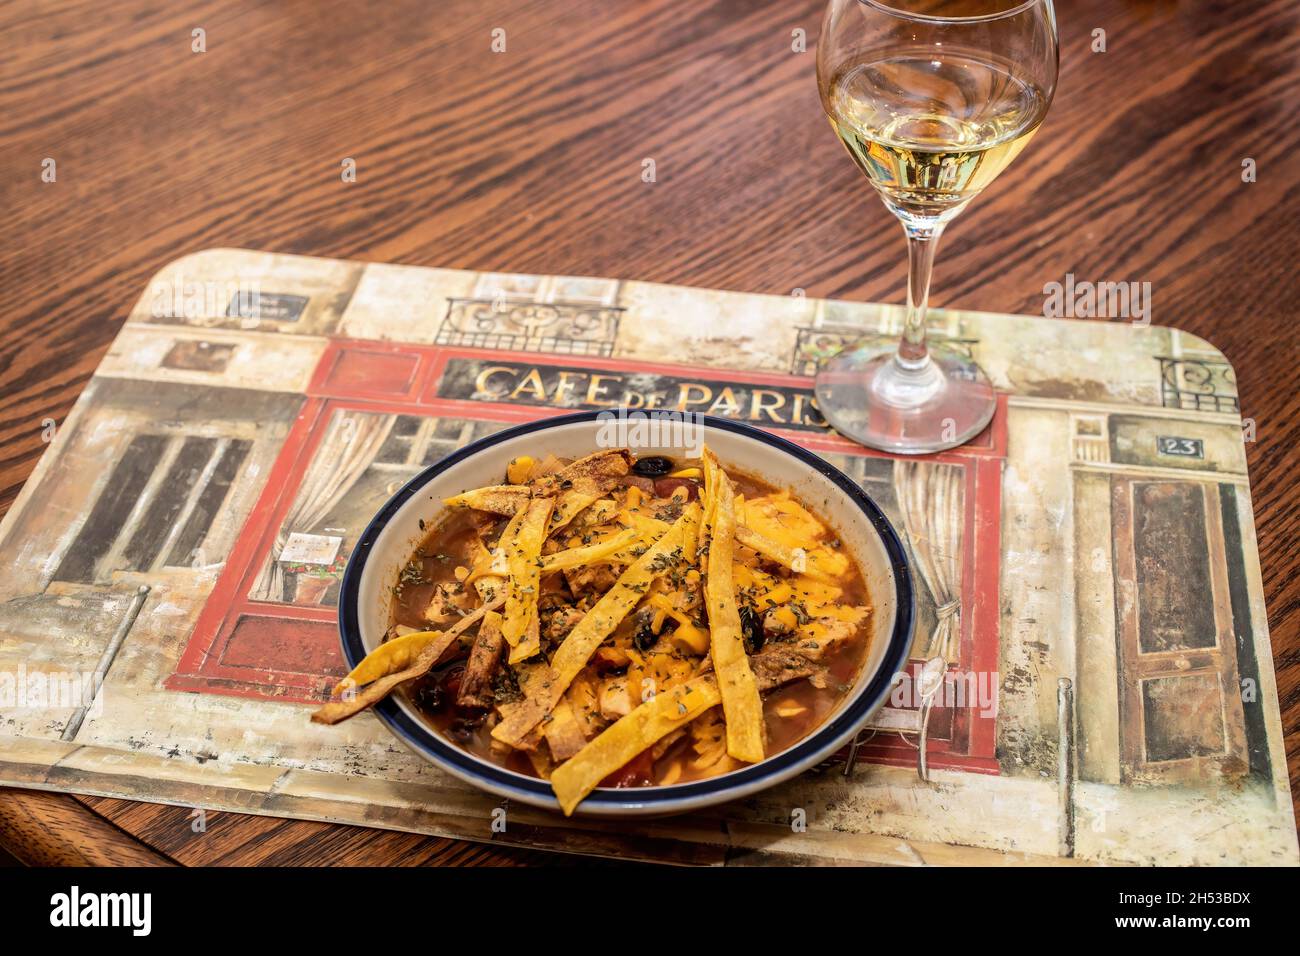 Chicken tortilla soup with white wine, 'Jig' on a Cafe de Paris placemat. Stock Photo